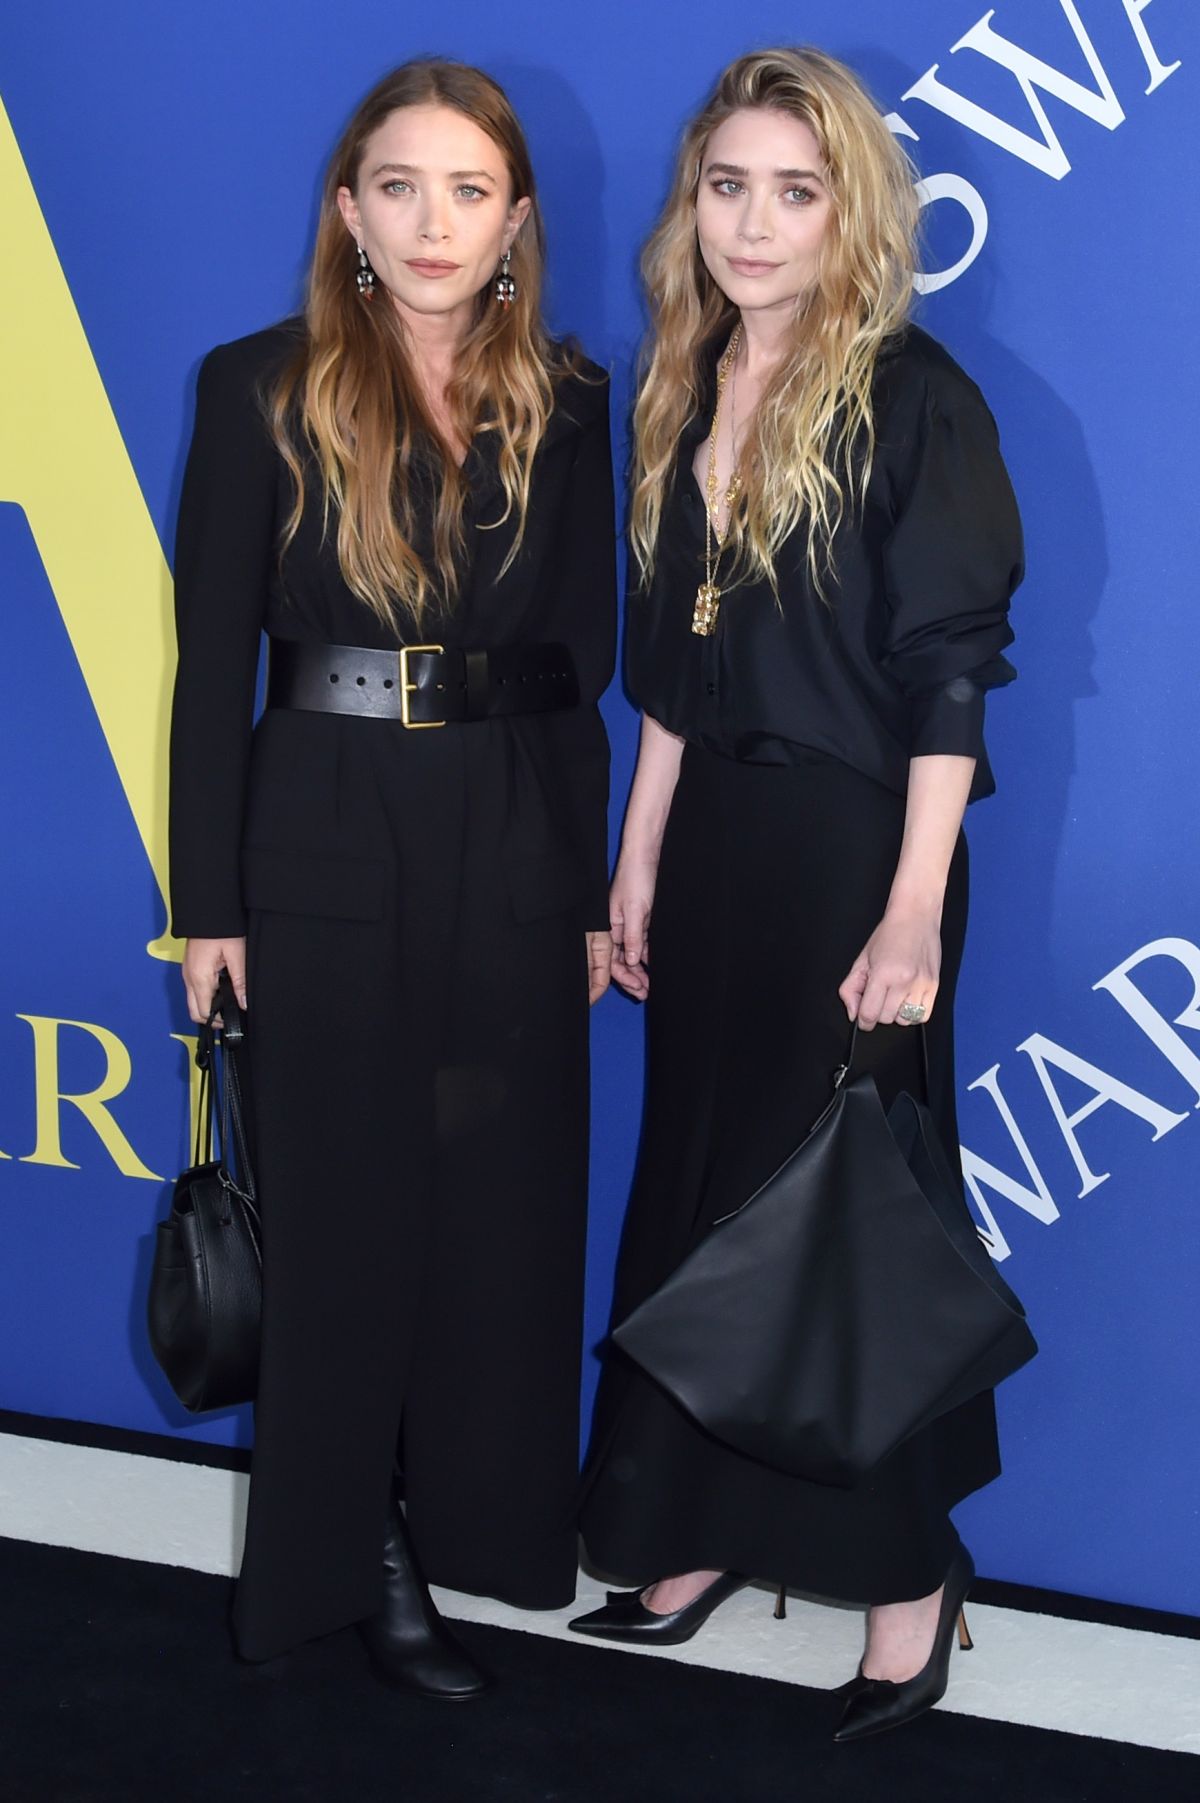 MARY KATE and ASHLEY OLSEN at CFDA Fashion Awards in New York 06/05 ...